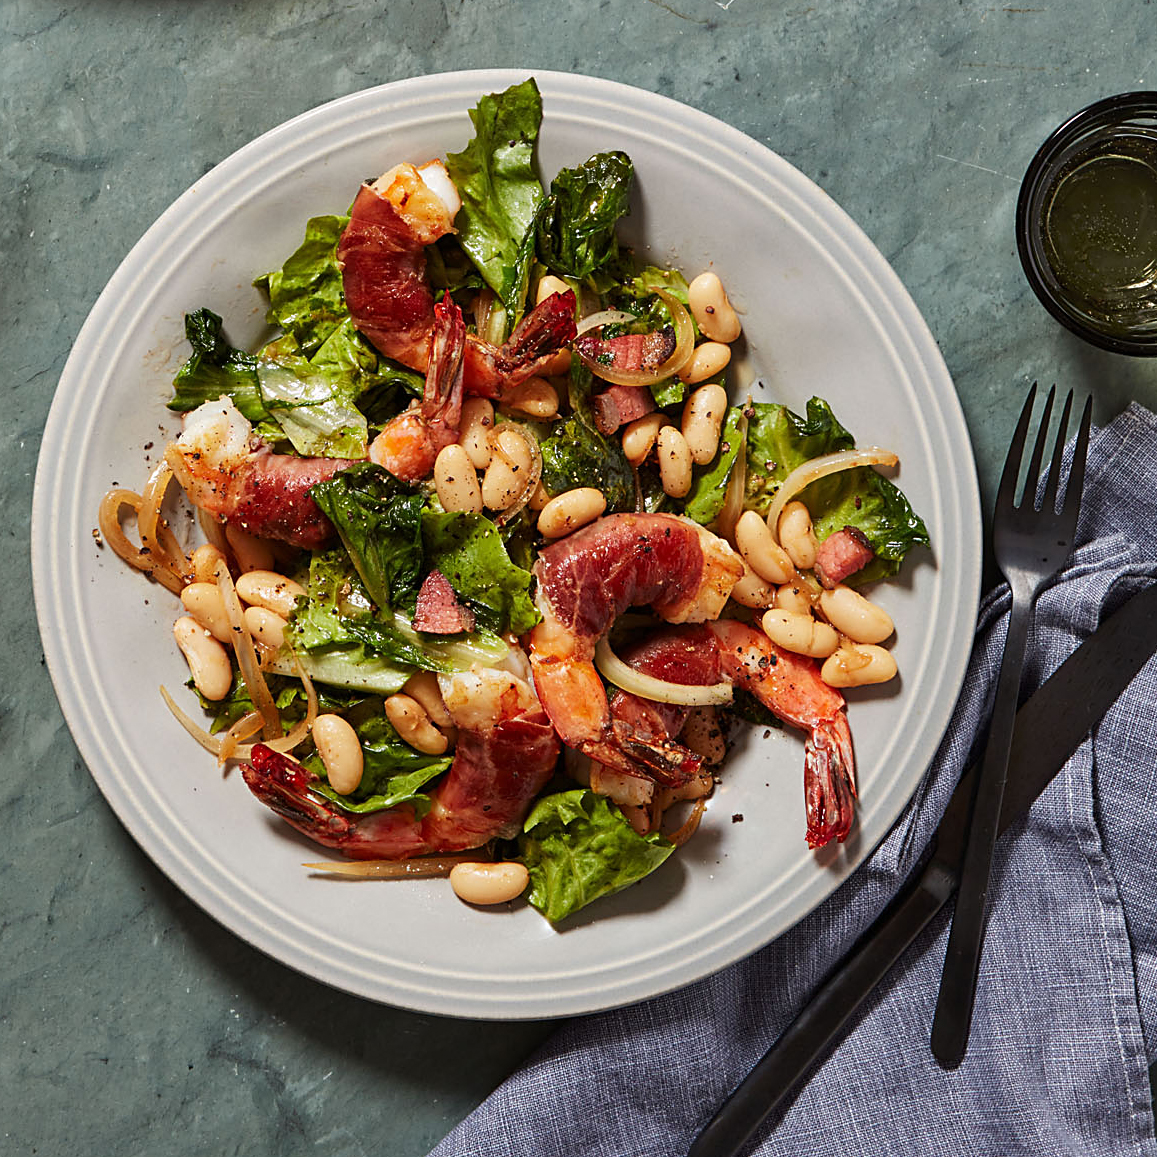 Rachael Ray's Shrimp with Sage & Prosciutto, Warm Escarole Salad, and White Beans